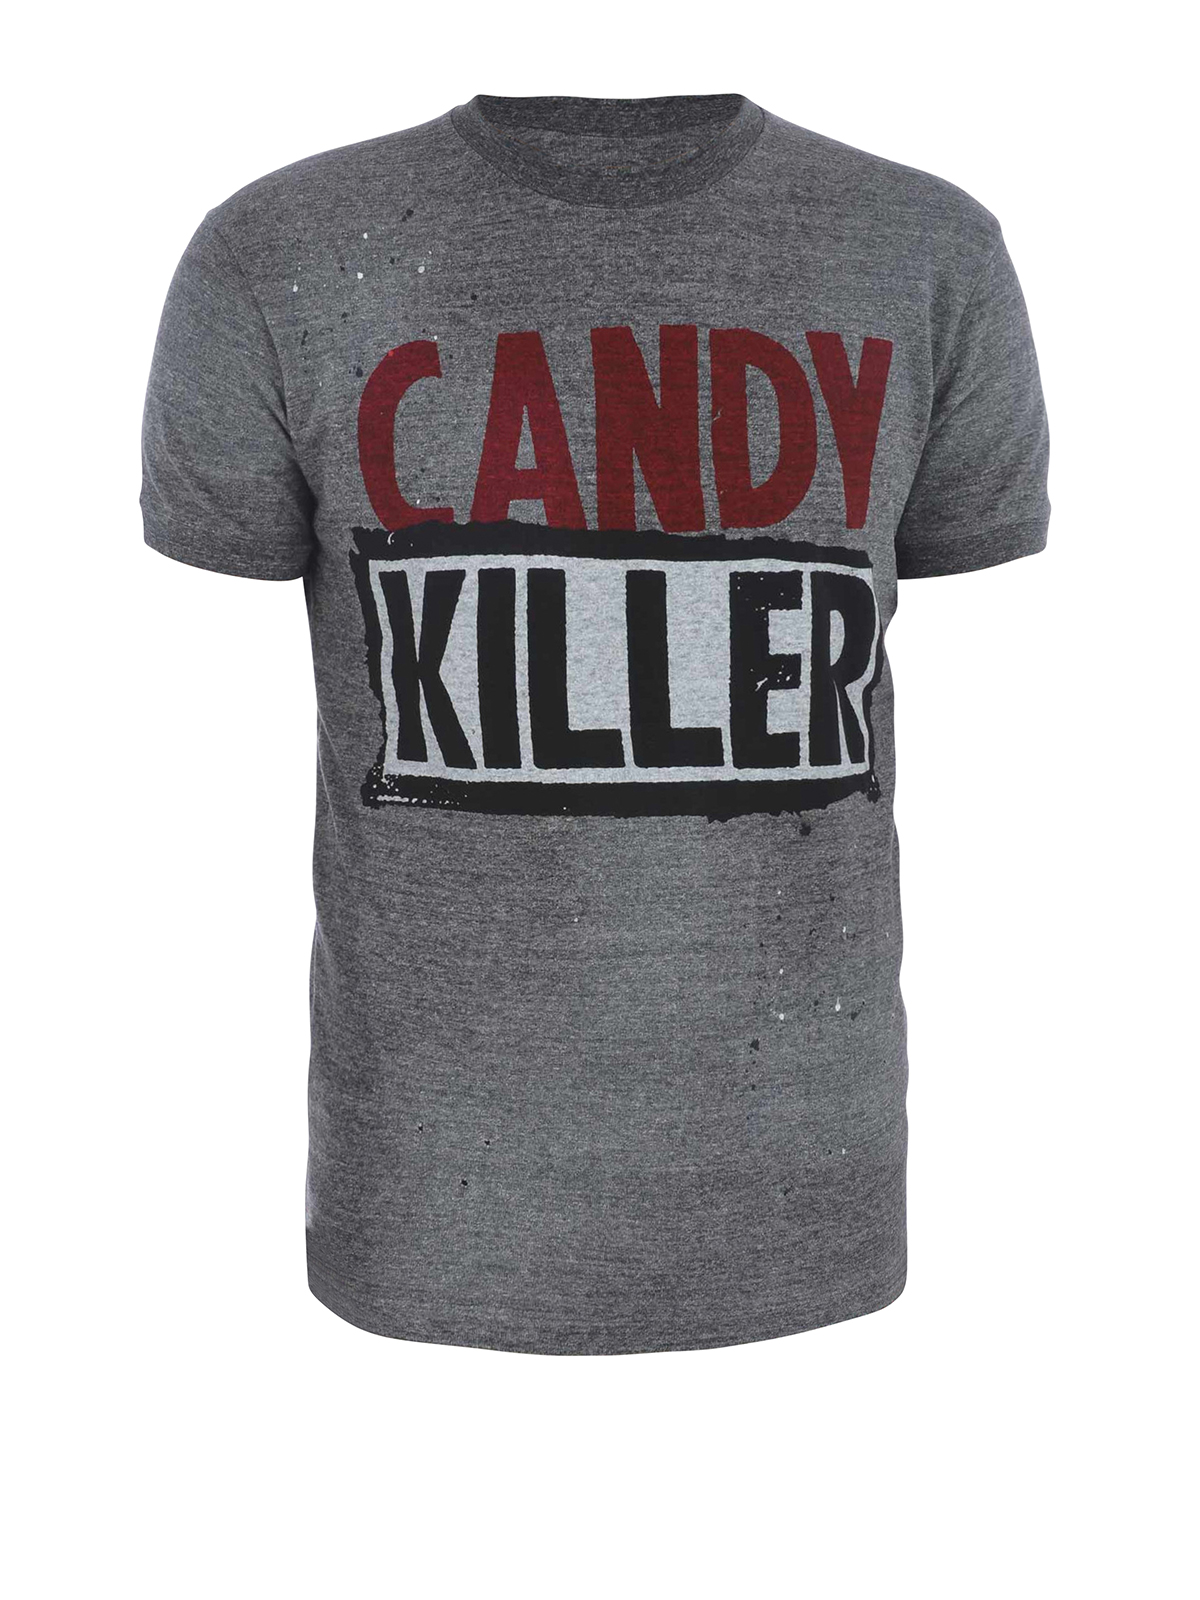 dsquared2 t shirt candy killer